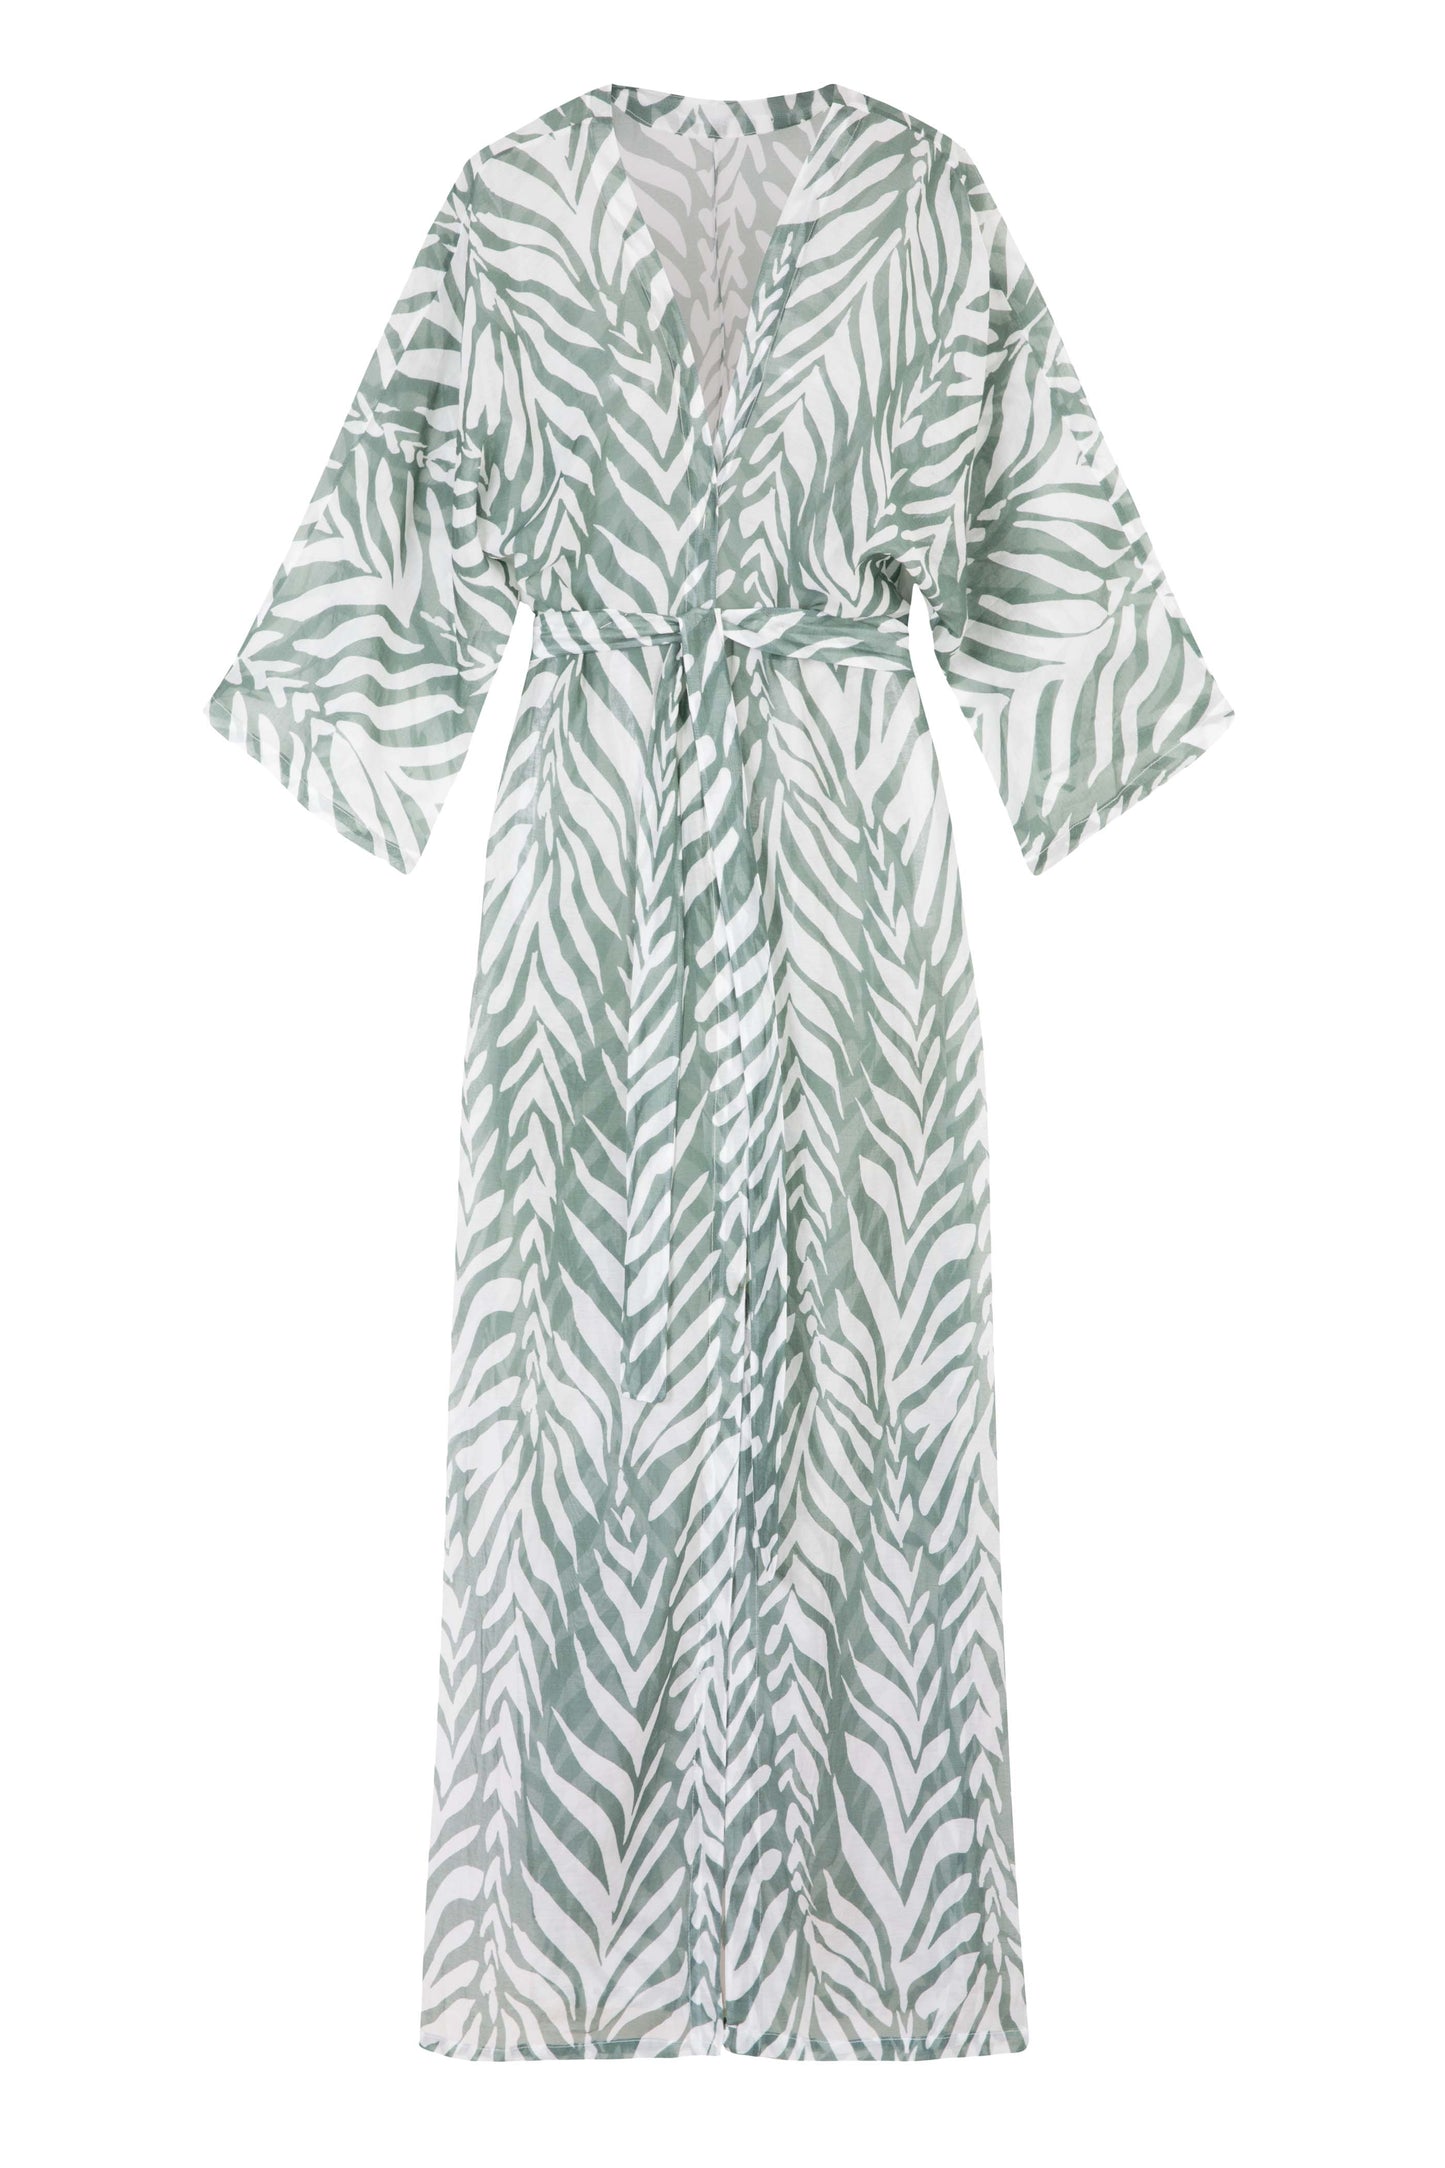 LONG KIMONO BEACH COVER-UP IN WILD WAVES